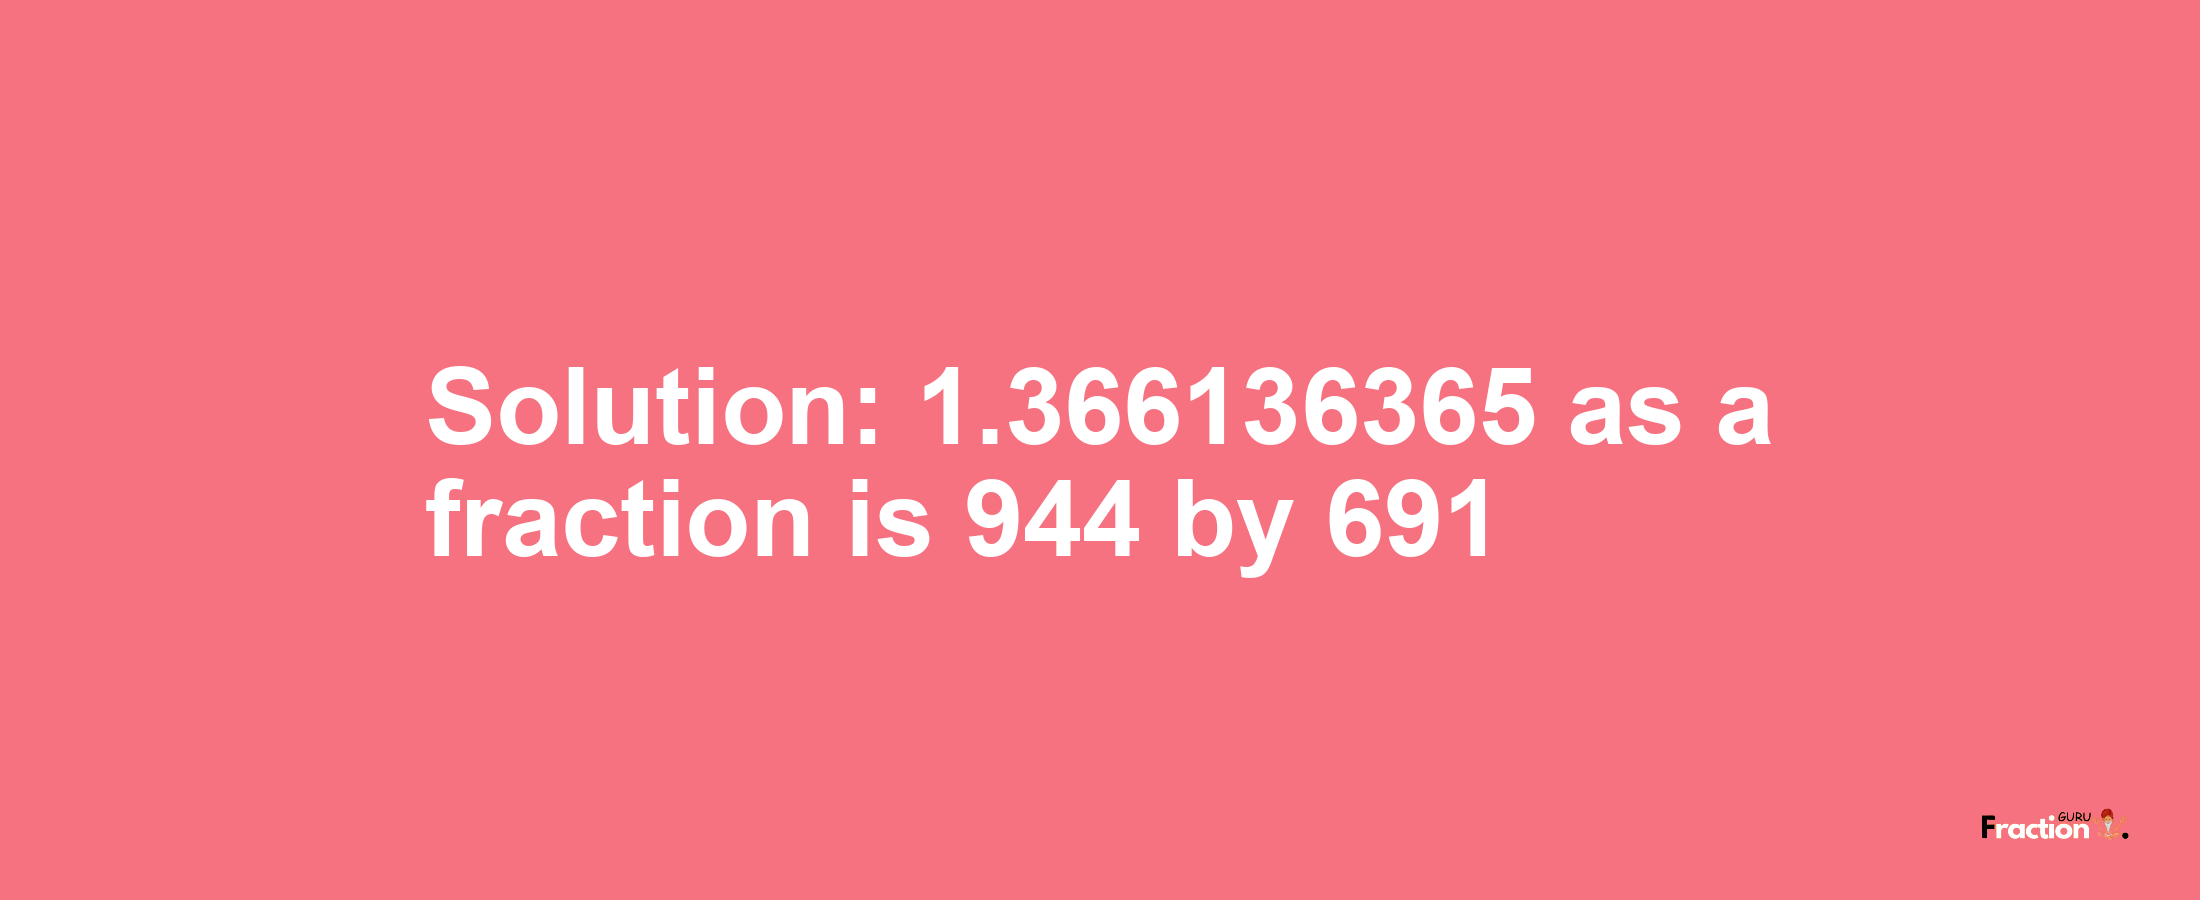 Solution:1.366136365 as a fraction is 944/691